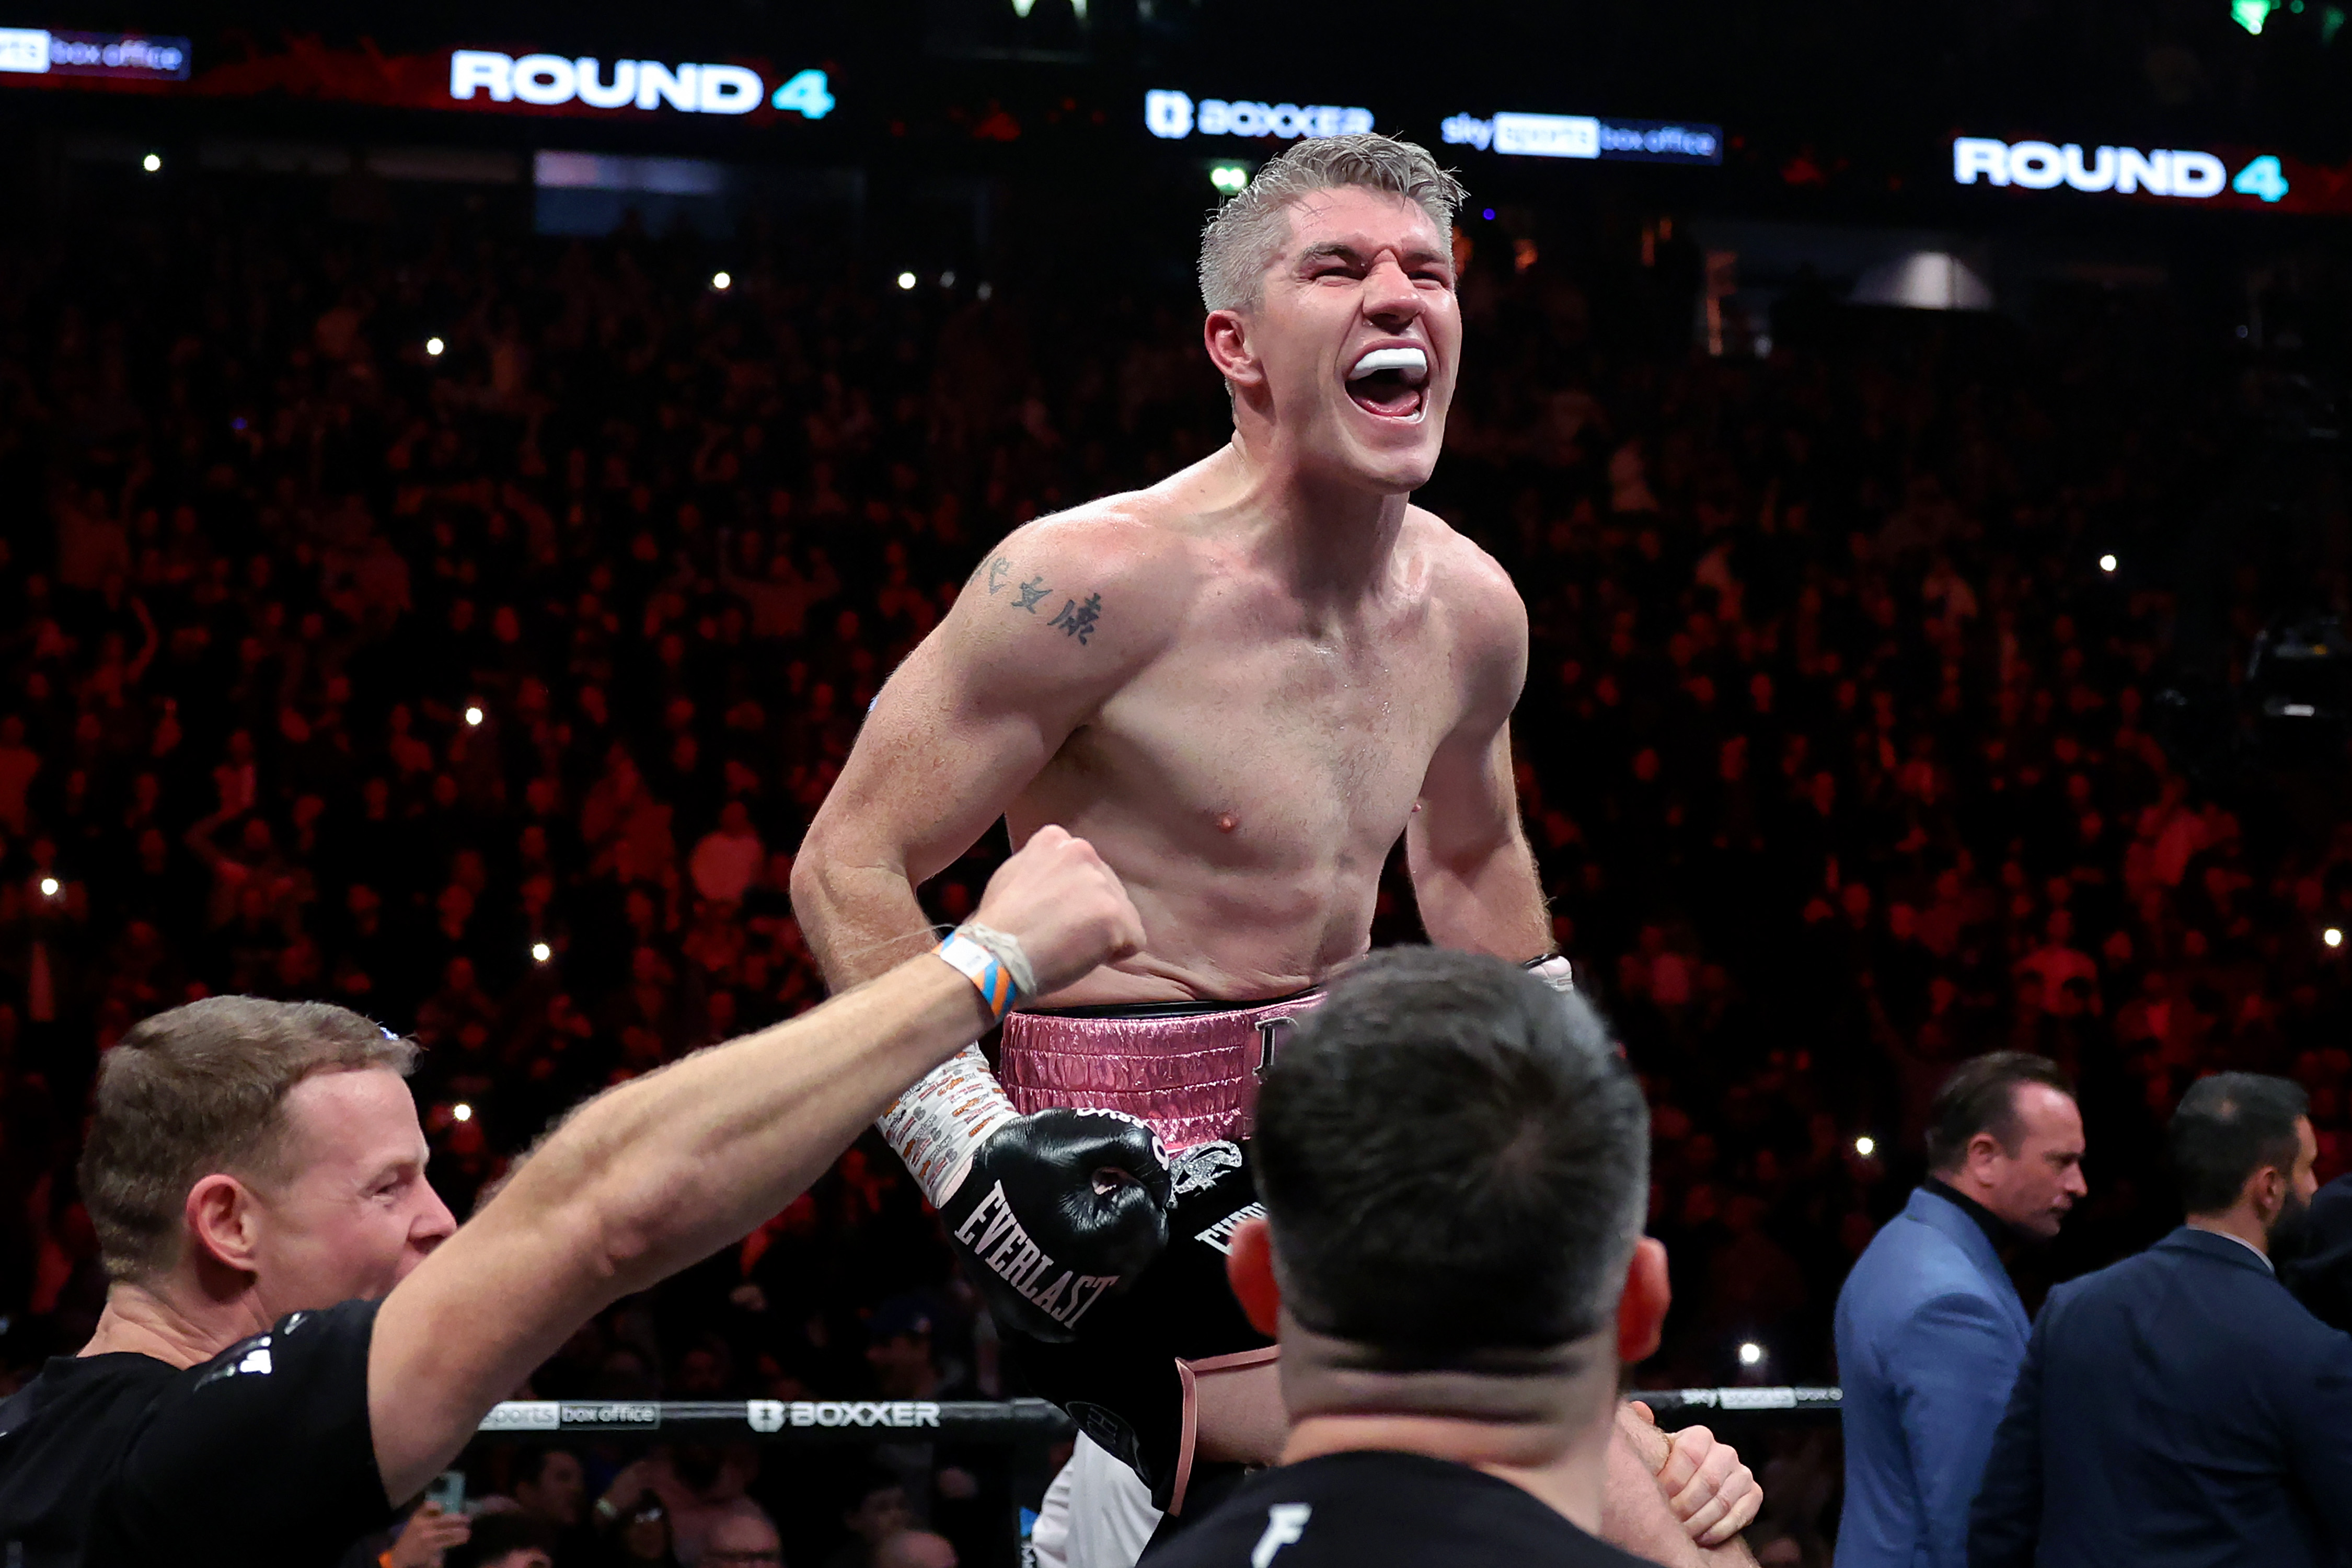 Liam Smith scored arguably the biggest win of his career over Chris Eubank Jr